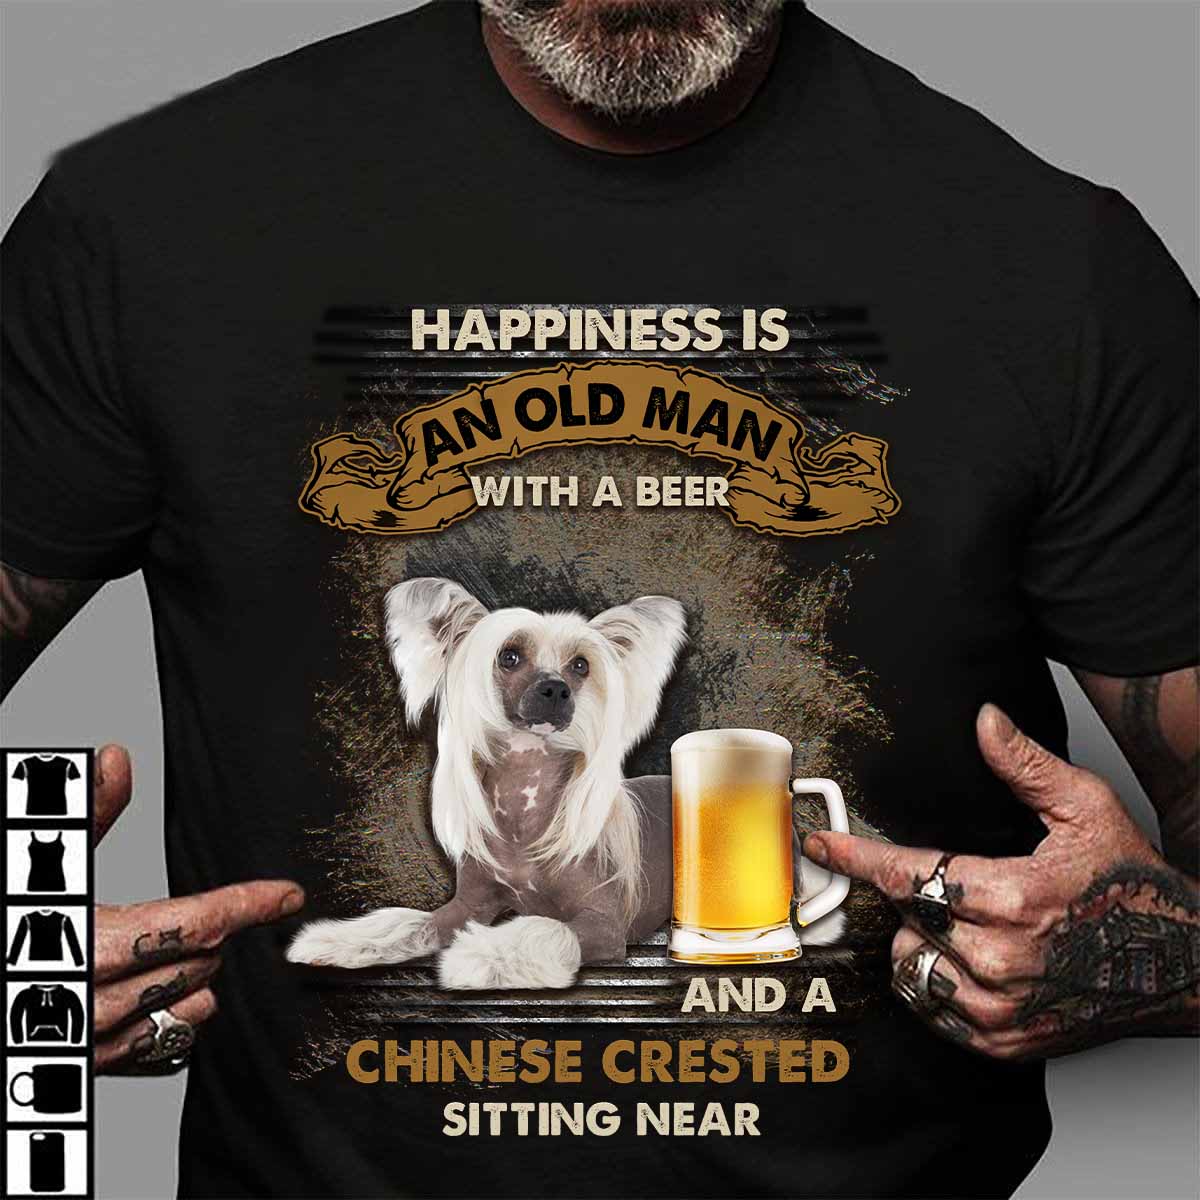 Chinese Crested Dog, Beer Lover – Happiness is an old man with a beer and a Chinese Crested sitting near